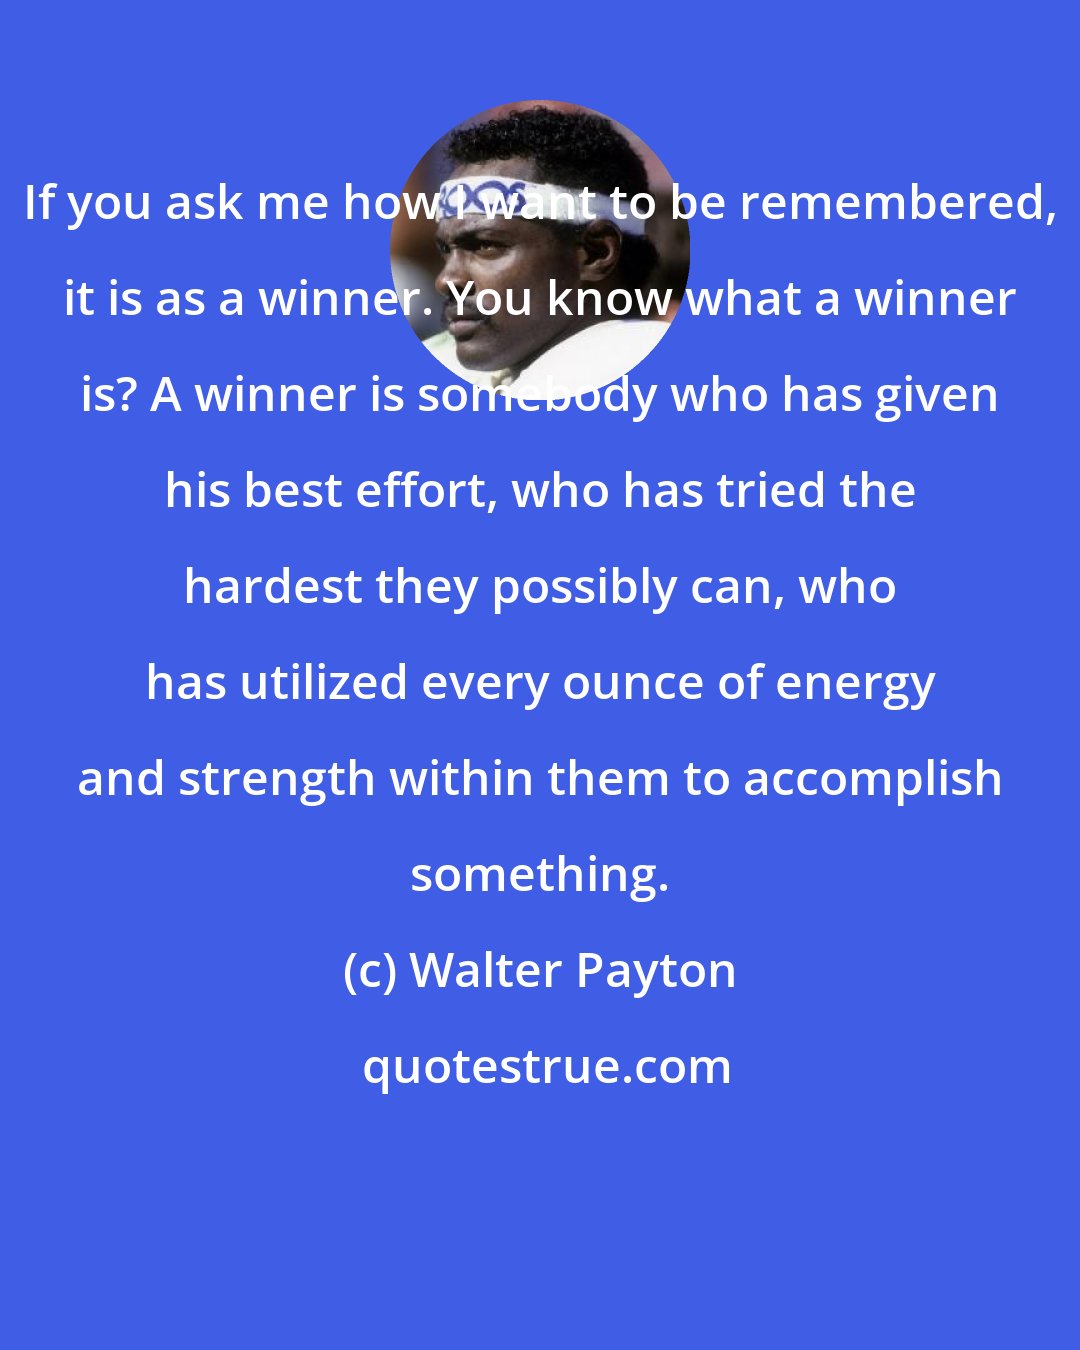 Walter Payton: If you ask me how I want to be remembered, it is as a winner. You know what a winner is? A winner is somebody who has given his best effort, who has tried the hardest they possibly can, who has utilized every ounce of energy and strength within them to accomplish something.